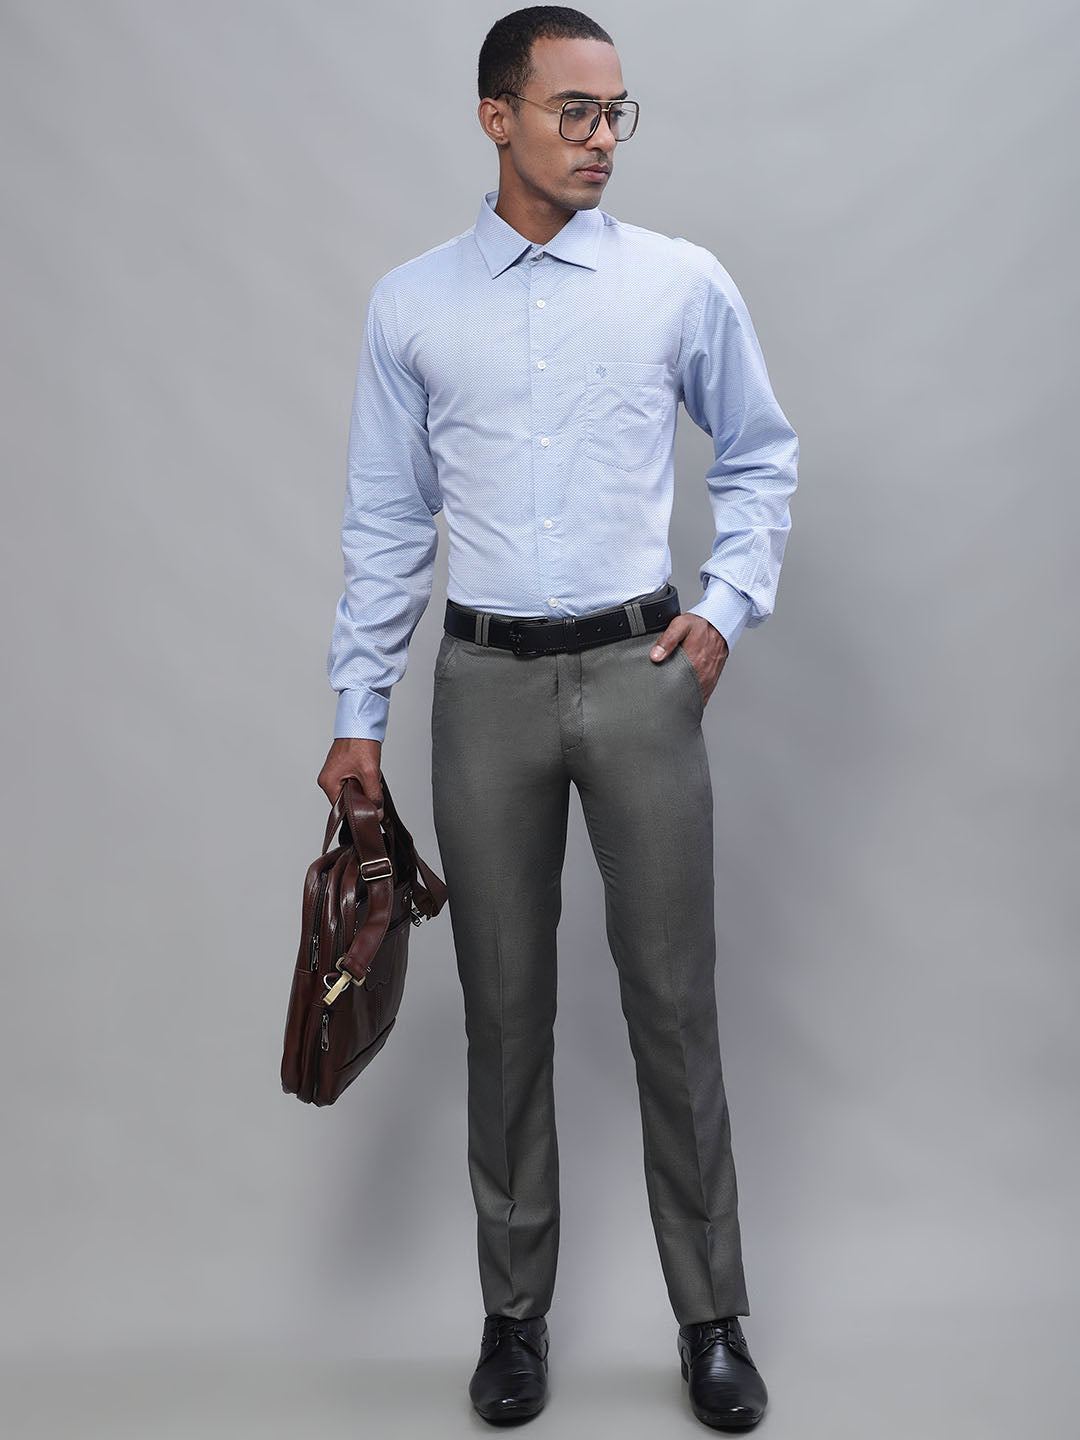 What Color Pants To Wear With Light Blue Shirt